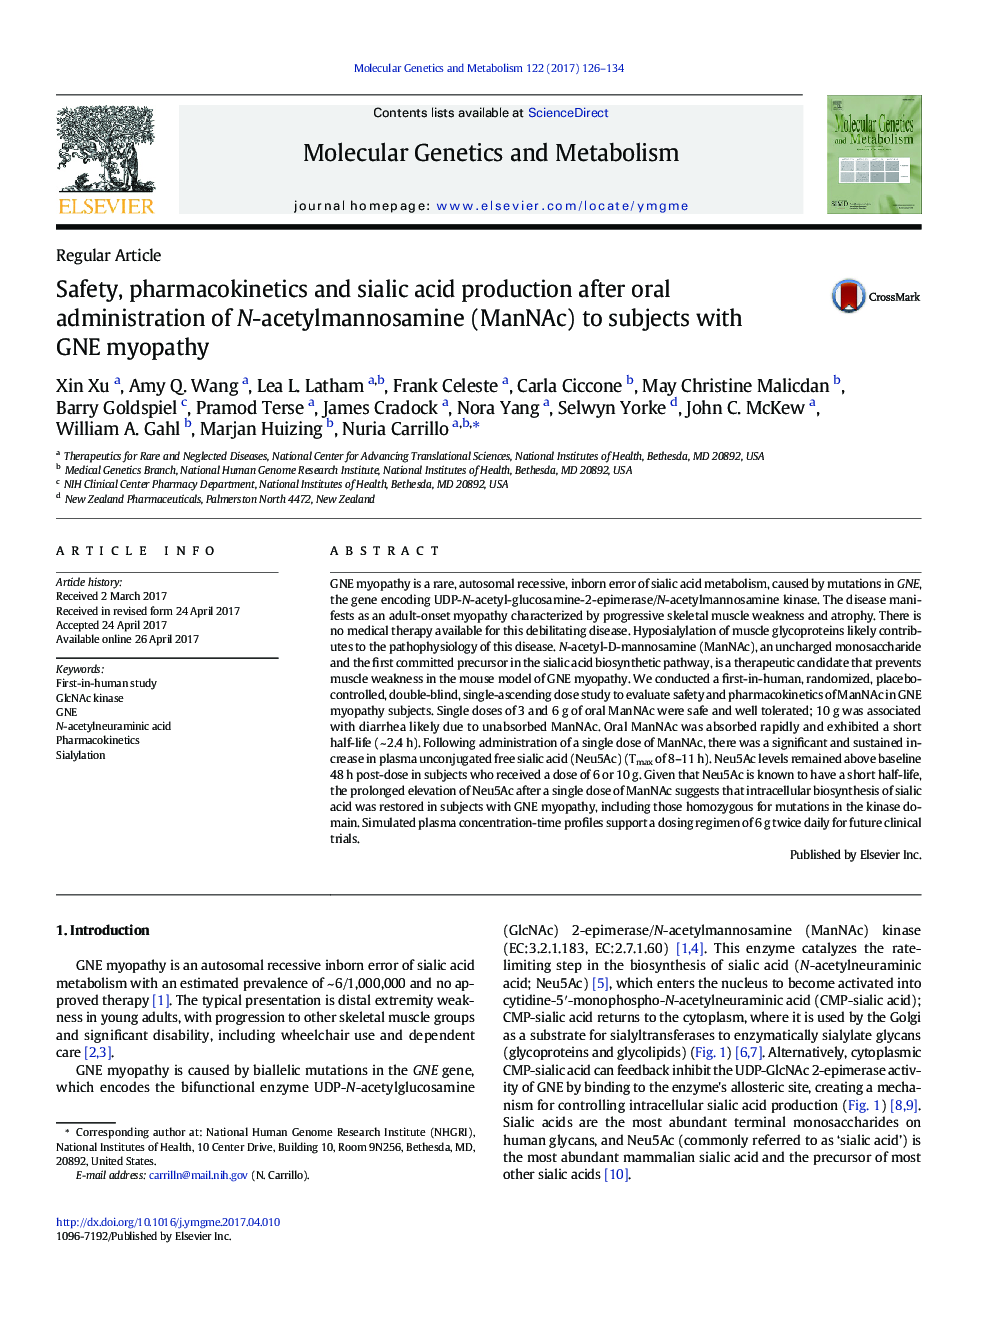 Regular ArticleSafety, pharmacokinetics and sialic acid production after oral administration of N-acetylmannosamine (ManNAc) to subjects with GNE myopathy